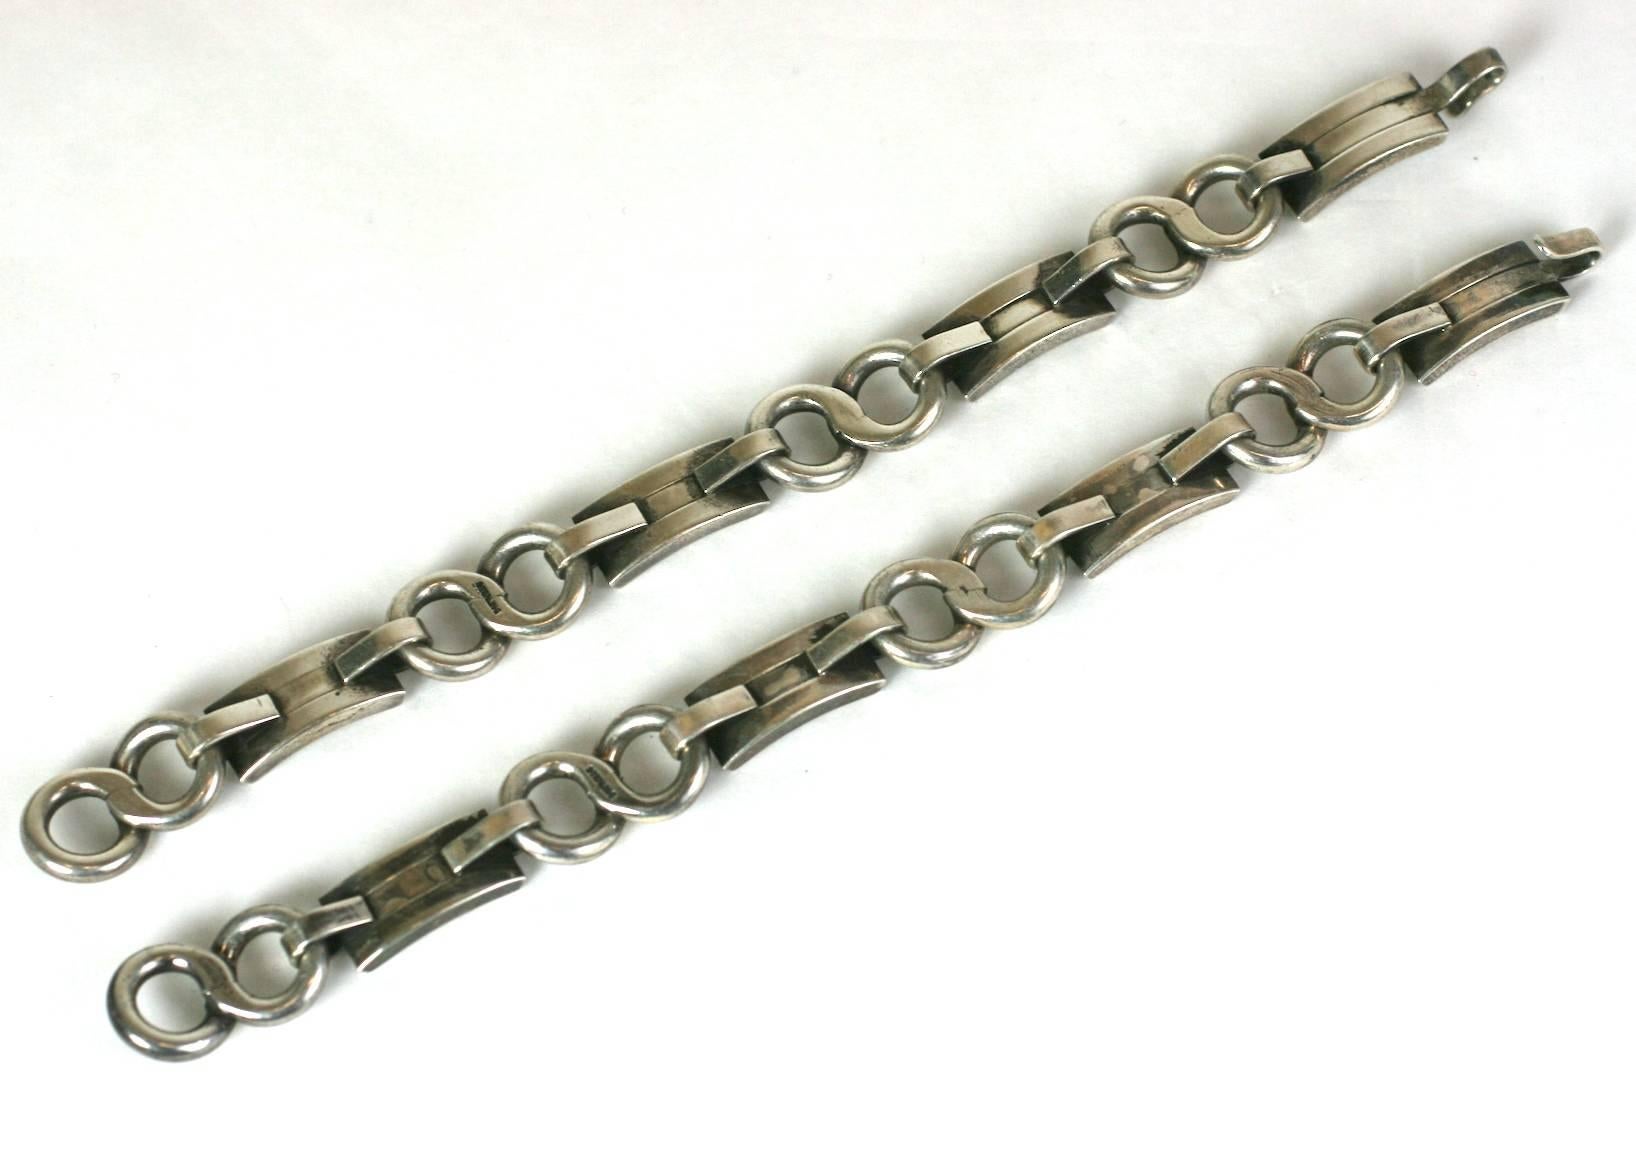 Pair of amazing Modernist Sterling Bracelets, Necklace option when both are combined. Hand wrought by a talented silversmith in extremely heavy gauge sterling silver. 
Wonderful design with curved Deco arcs connected by figure 8's. 
Superb quality